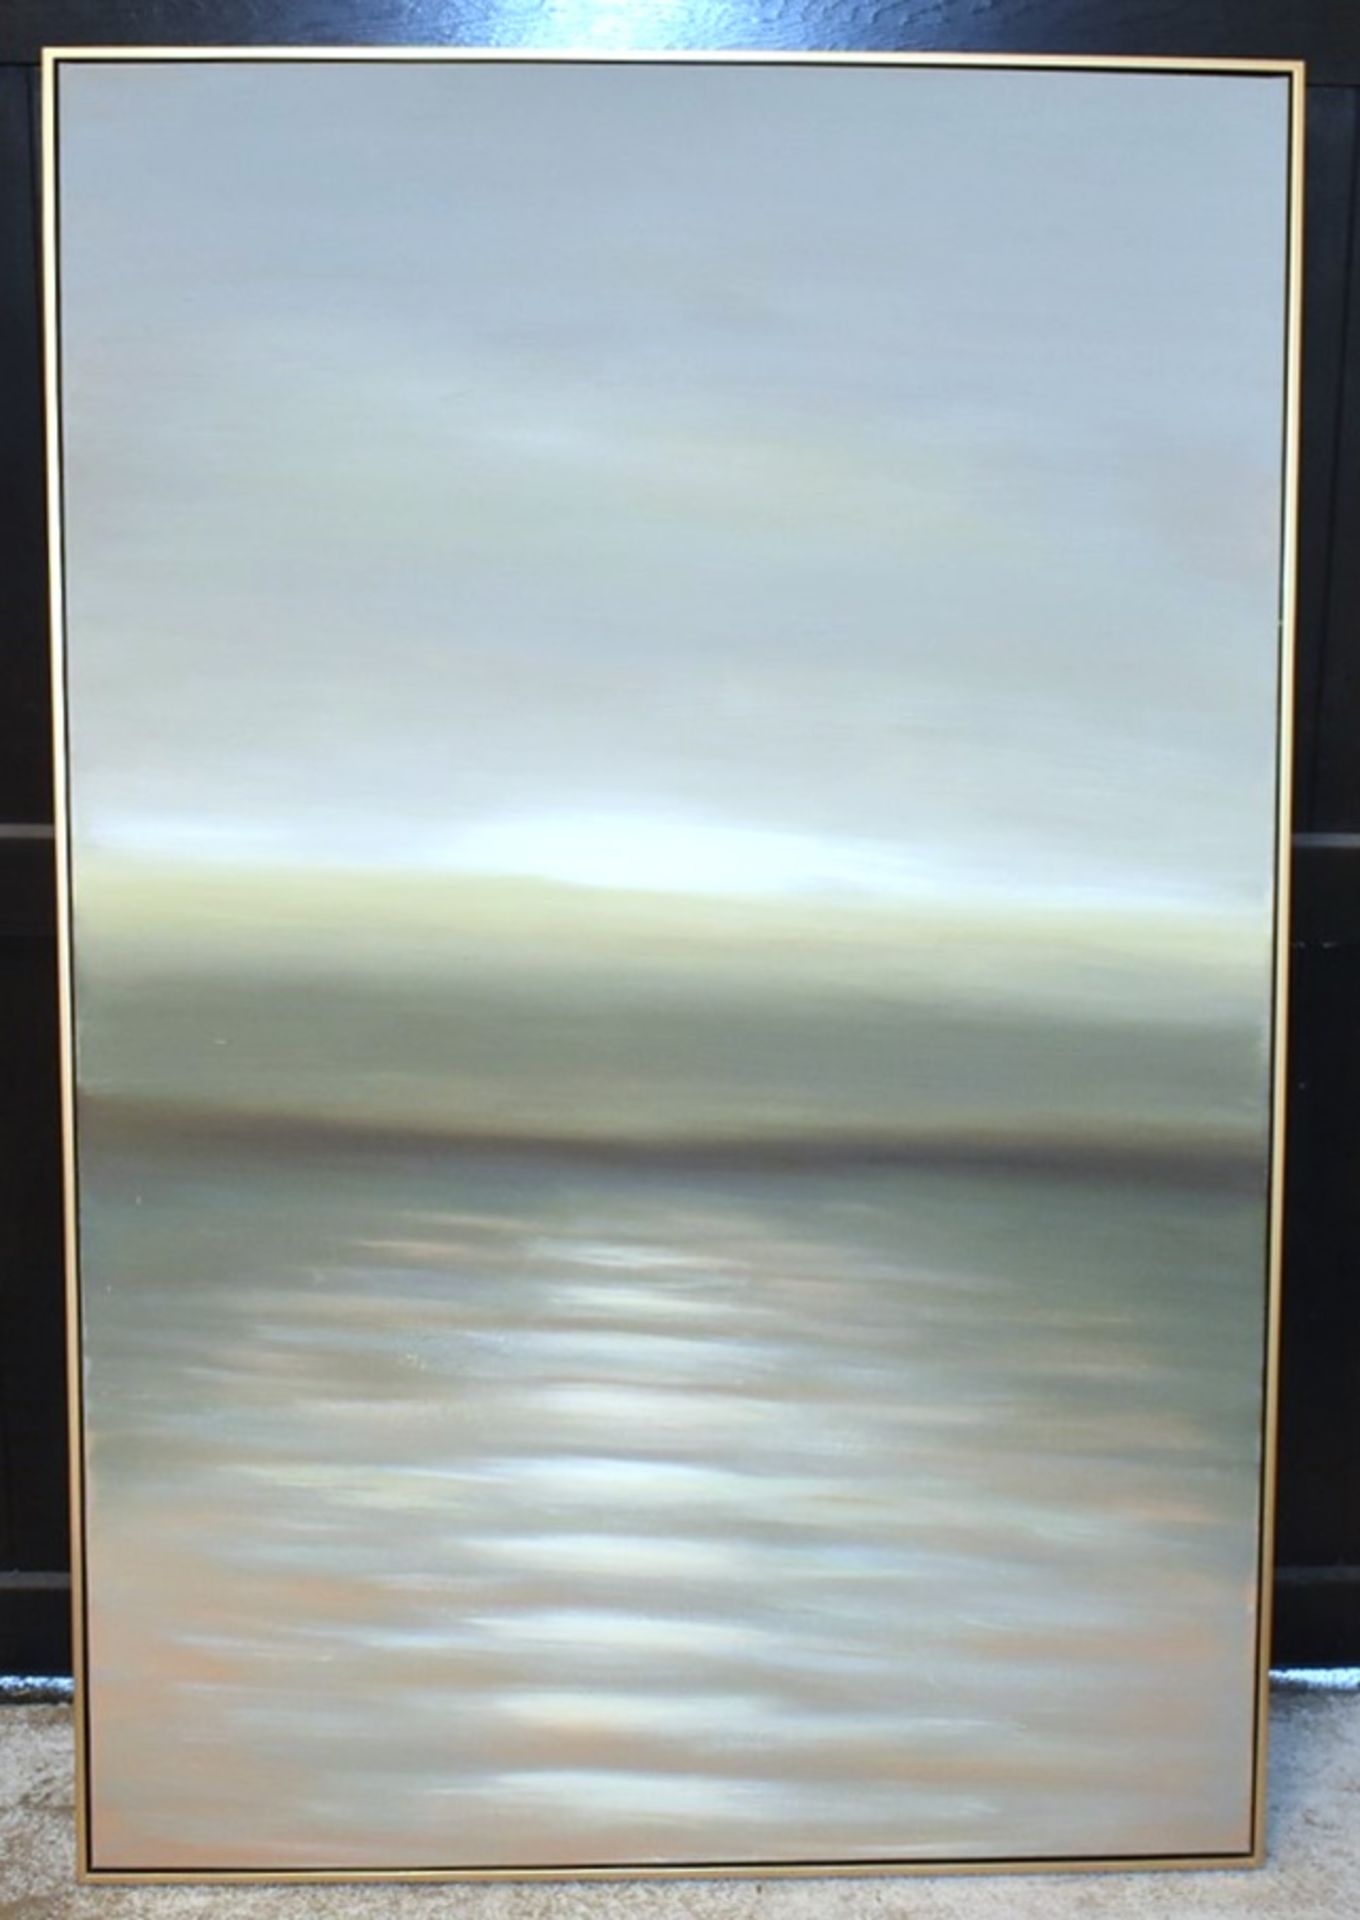 1 x Dusk Canvas Hand Painted Wall Art in Gold Frame - Large Size - RRP £255 - NO VAT ON THE HAMMER! - Image 2 of 8